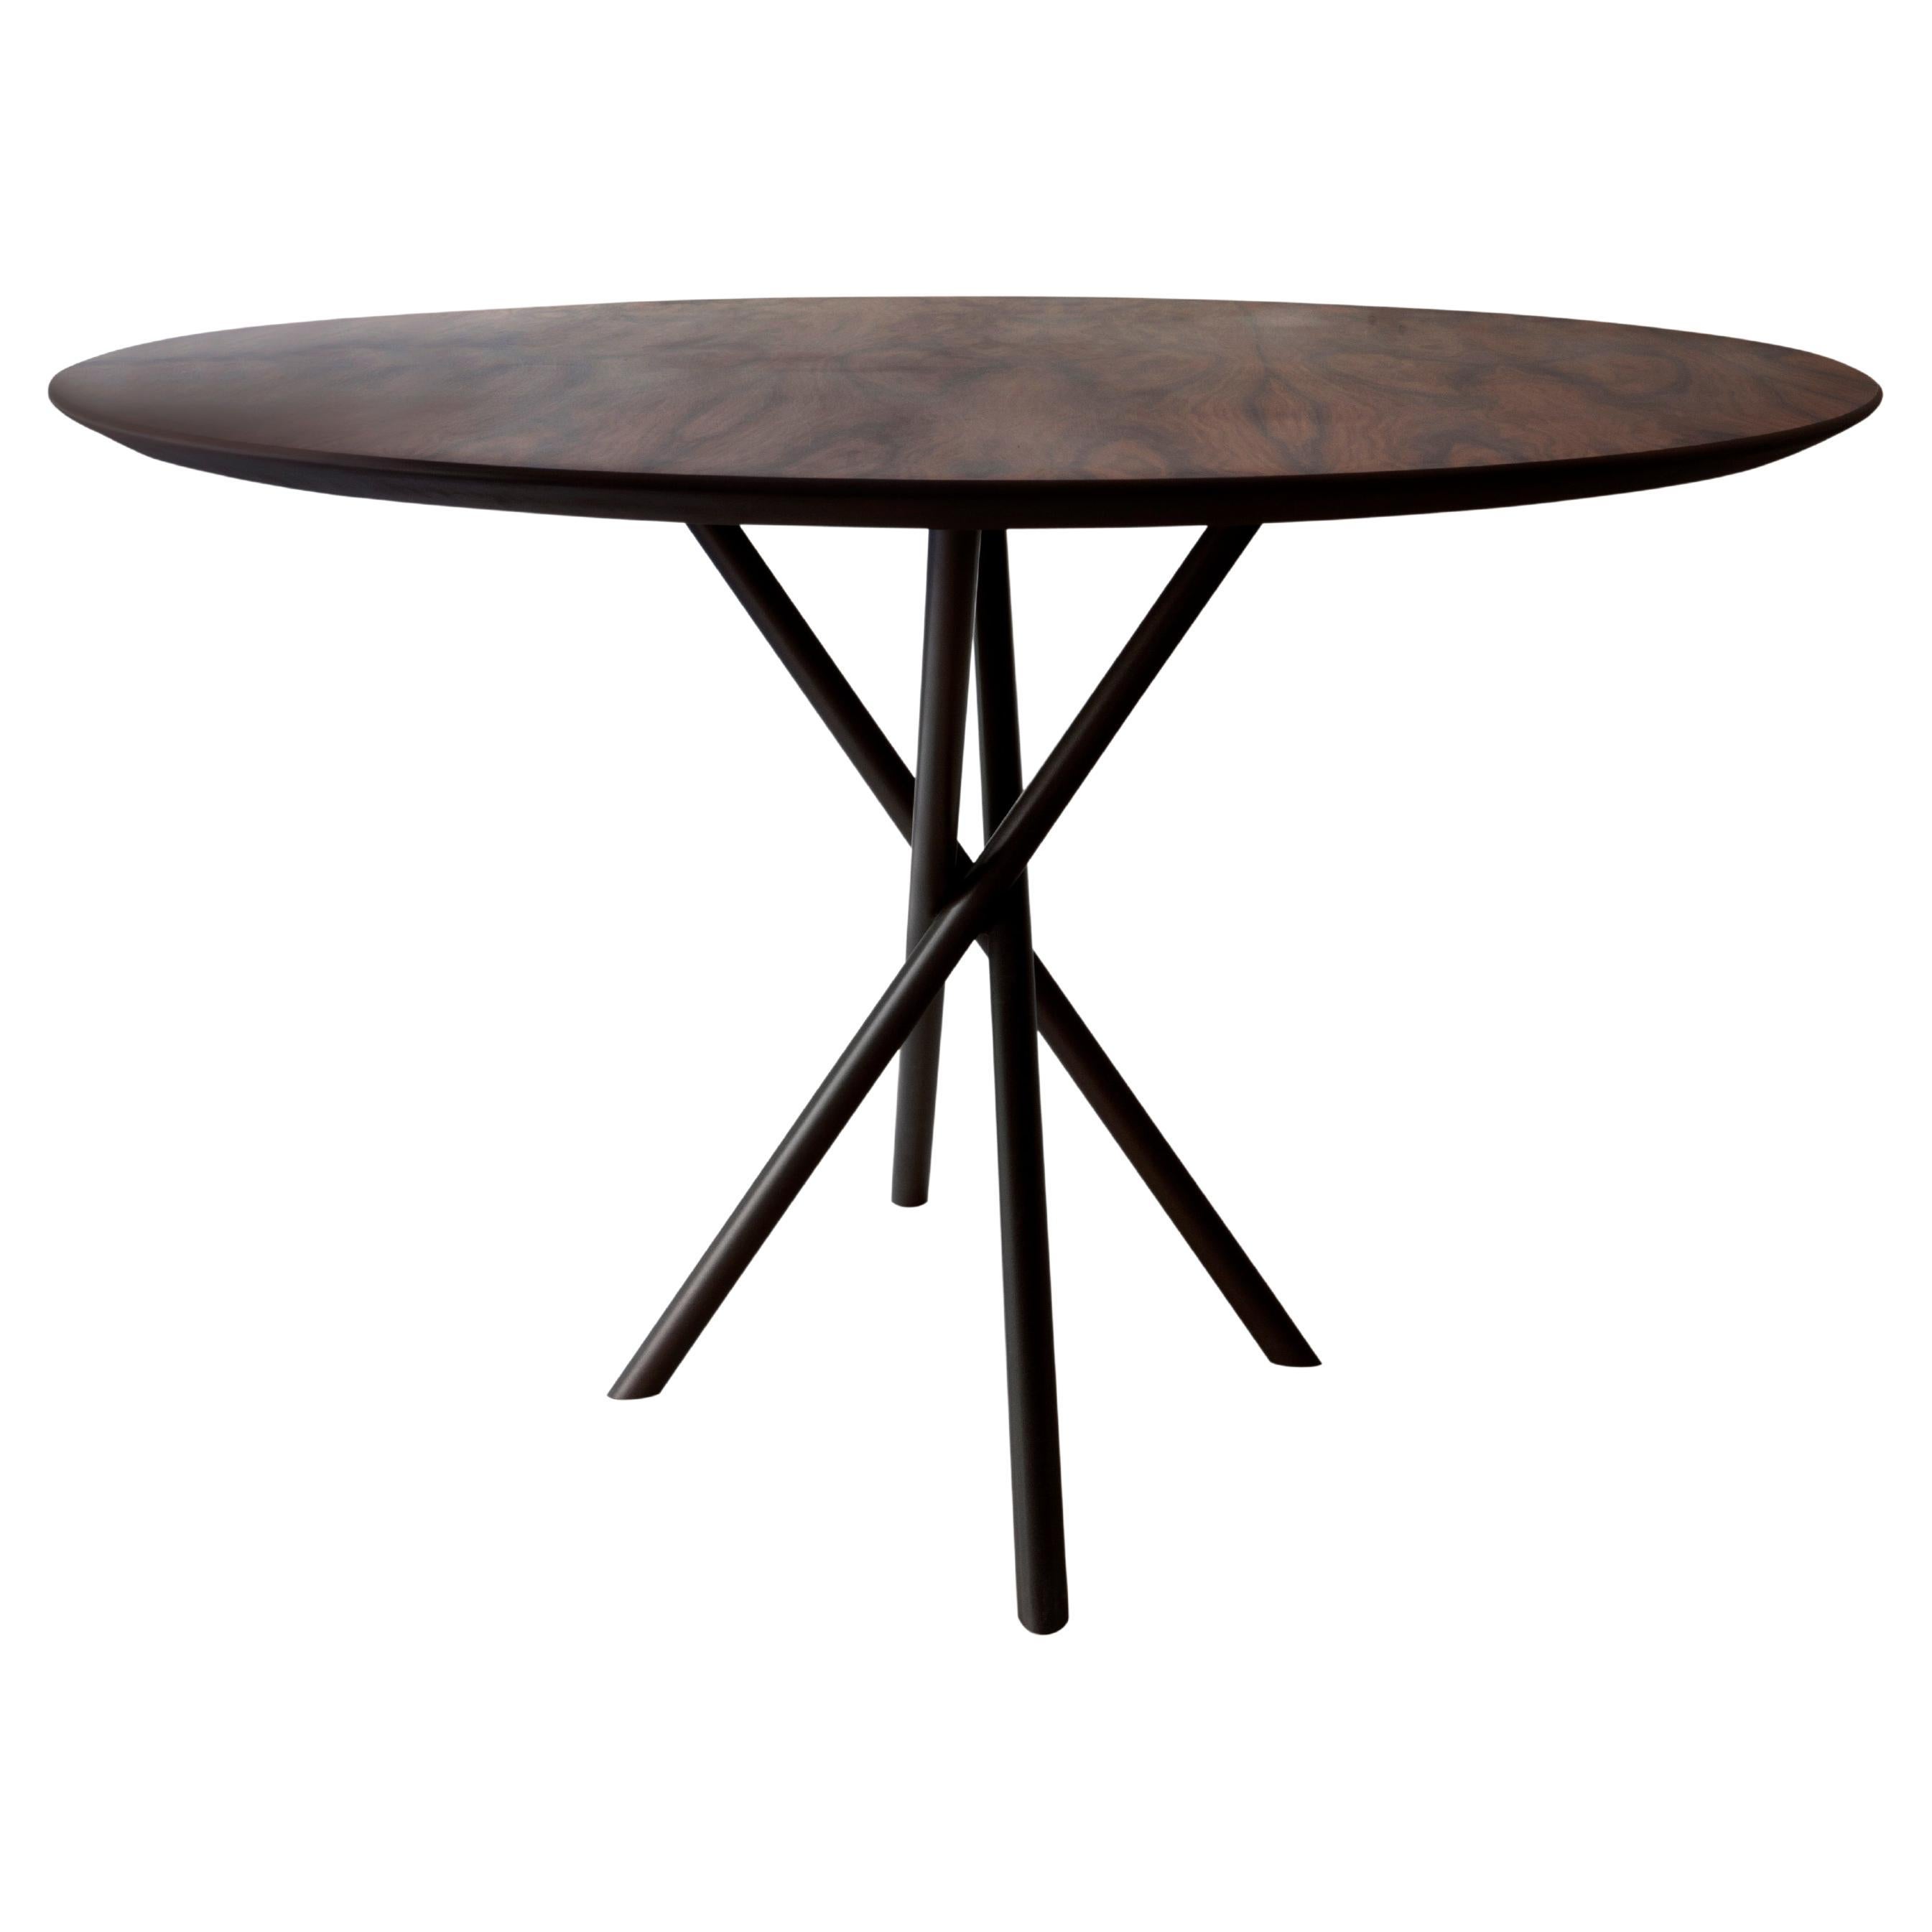 "Hastes" Modernist Round Dining Table Black Steel and Walnut Wood